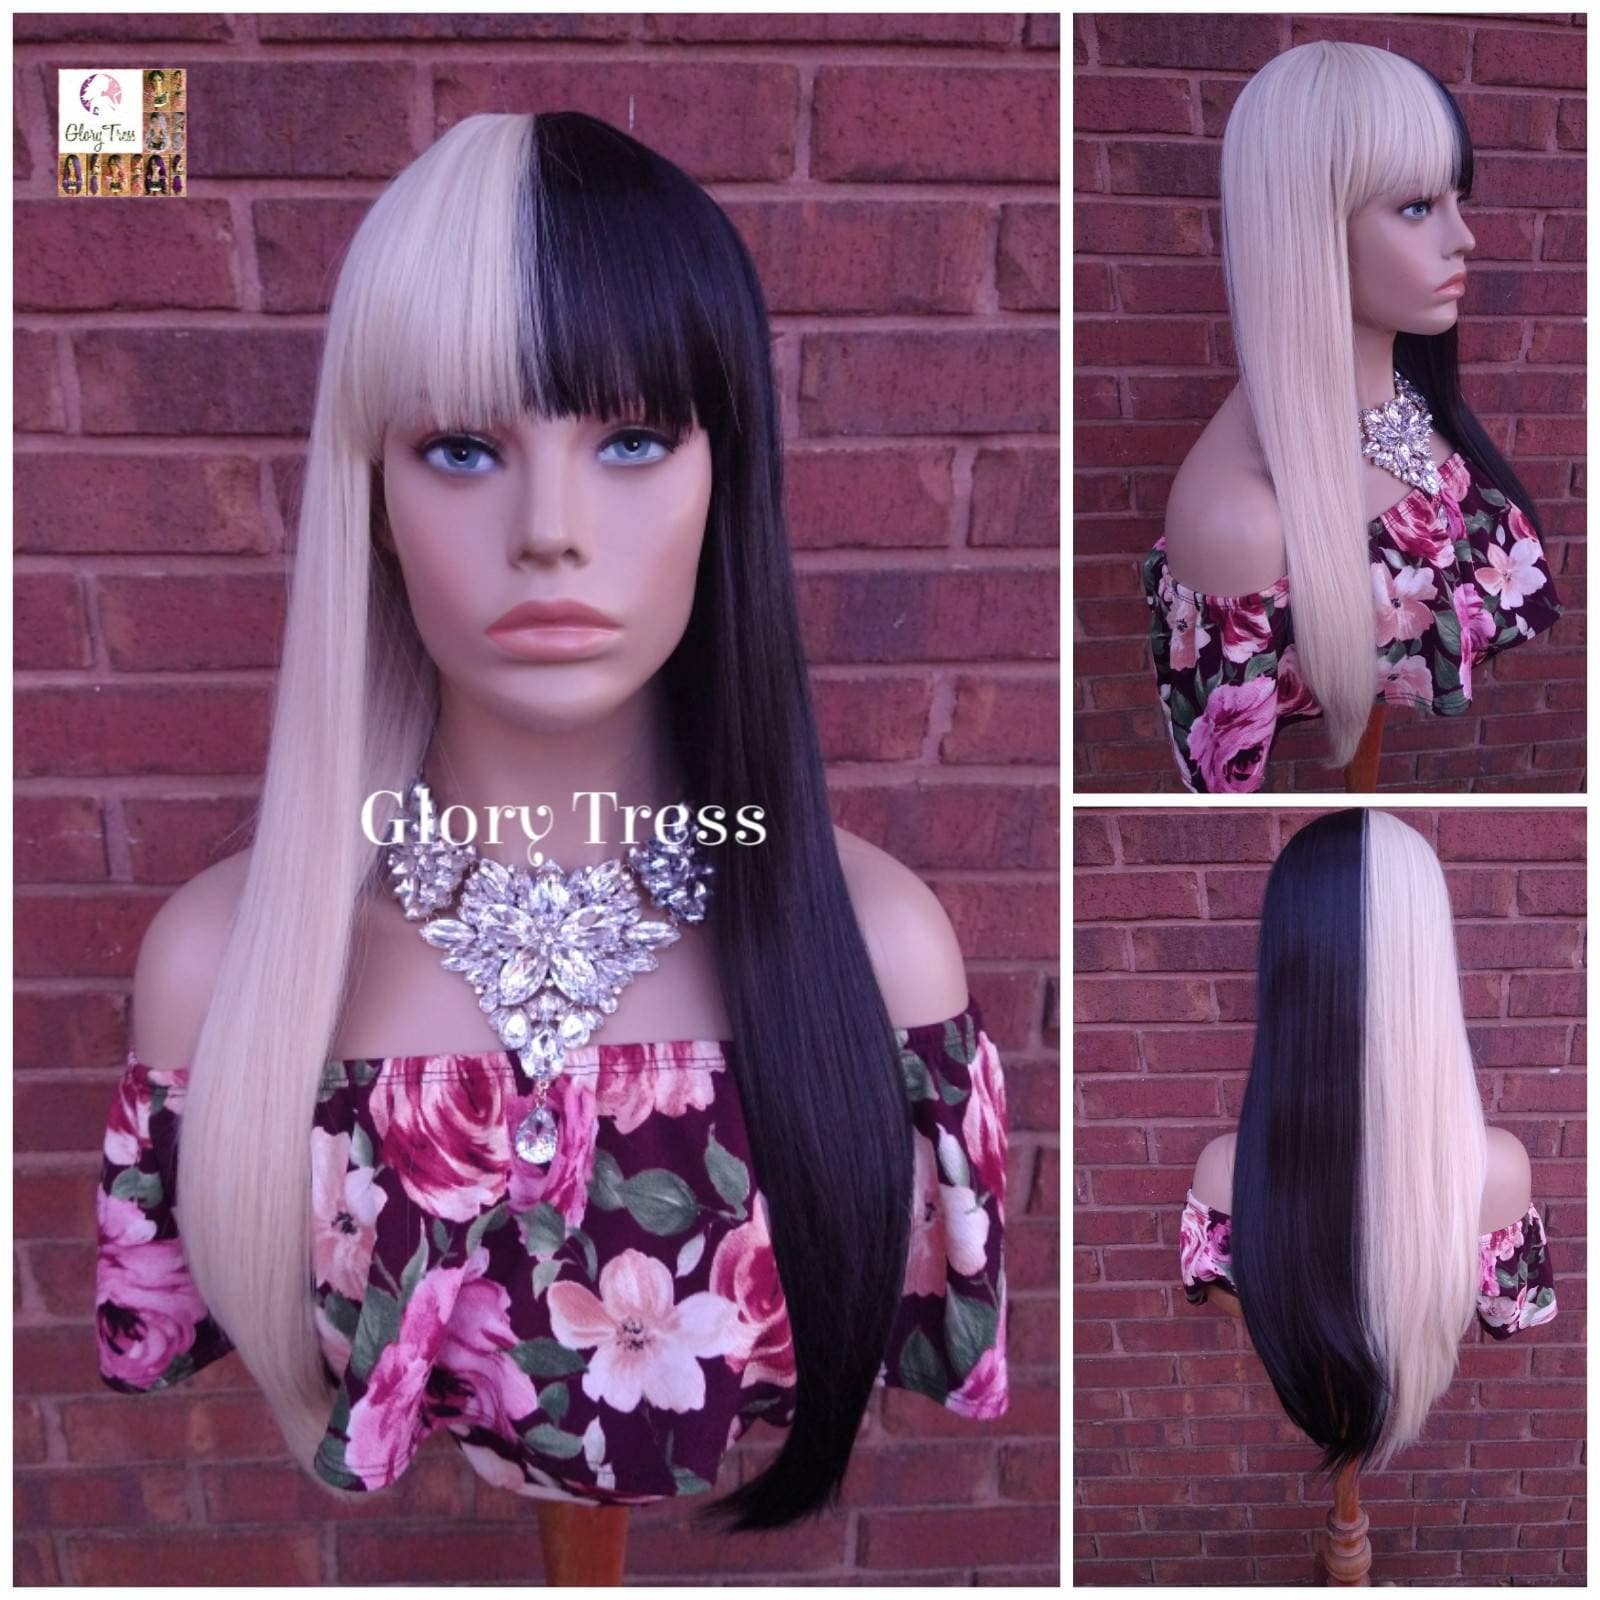 Long Full Wig, Wig with China  Bangs, Half Black/Half Blonde Wig, Glory Tress Wigs // SHOW-STOPPER